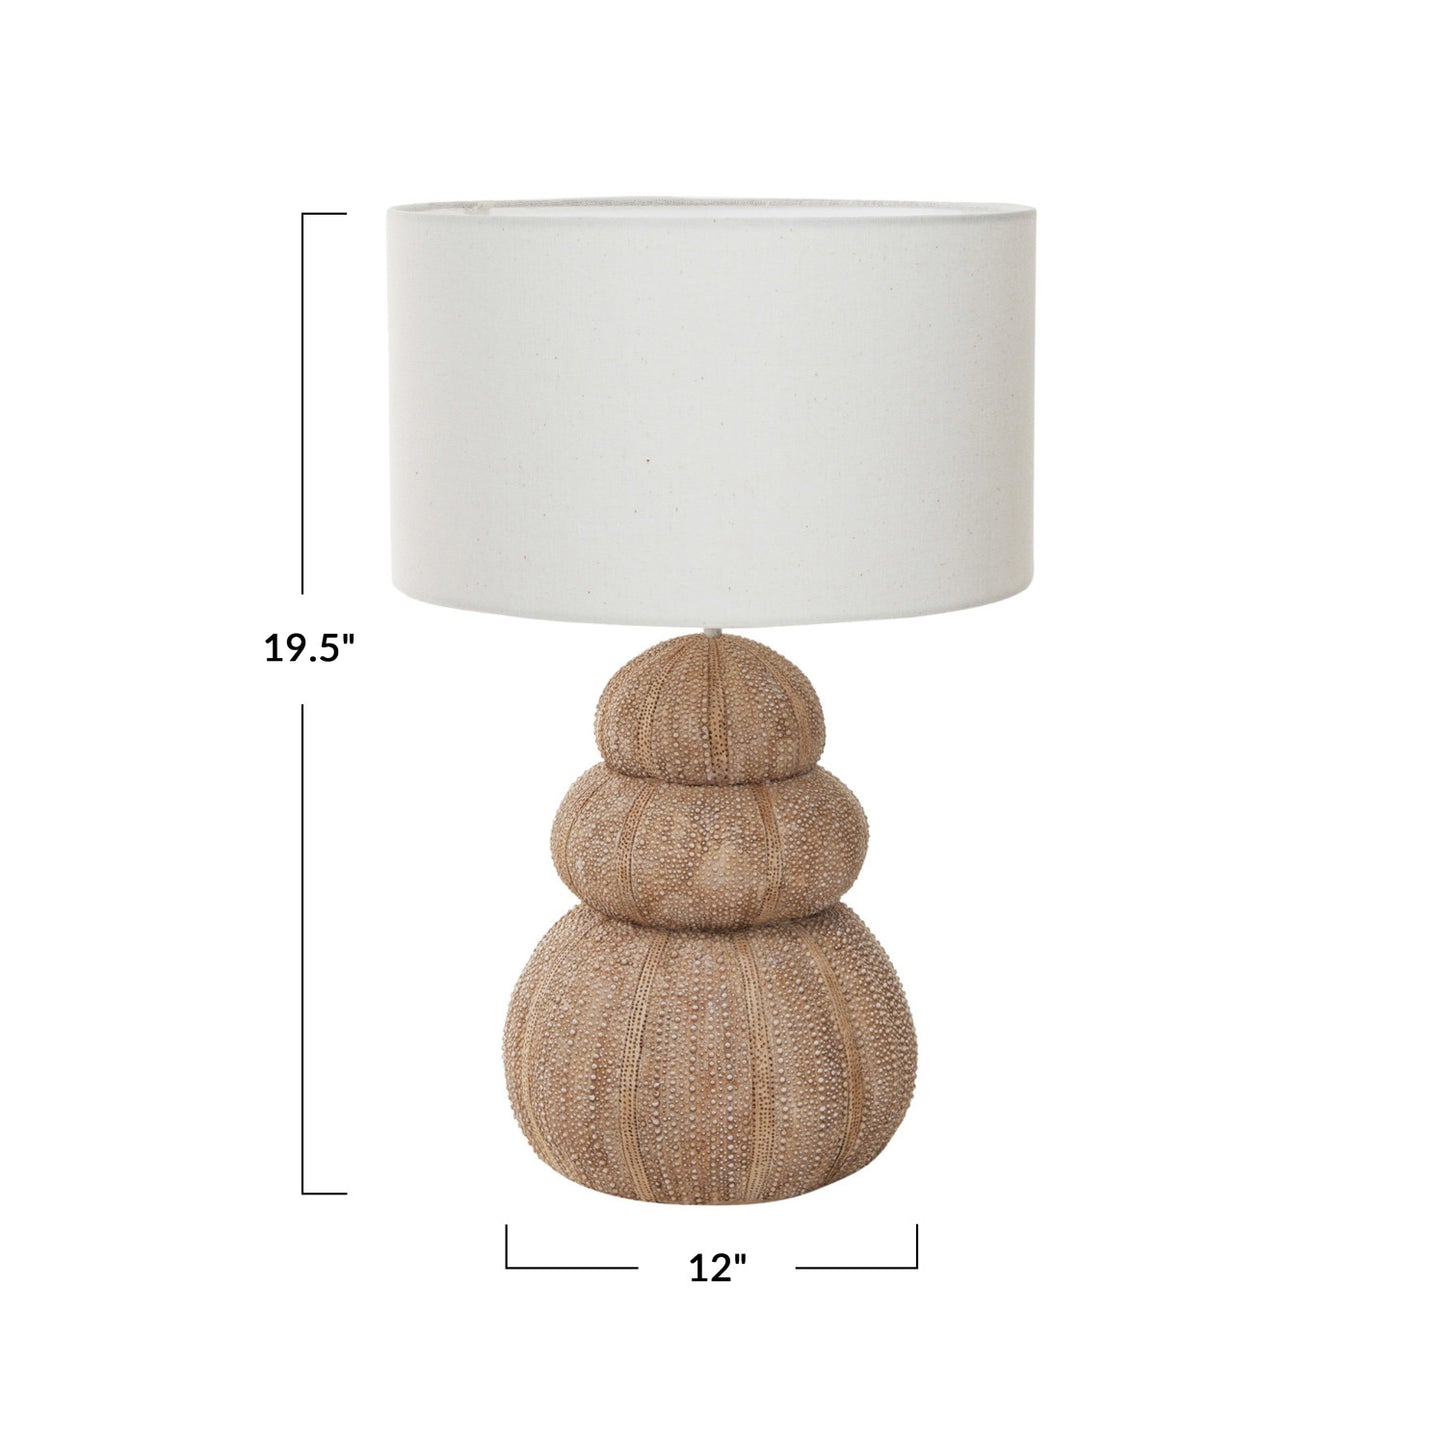 Resin Stacked Sea Urchin Table Lamp w/ Linen Shade